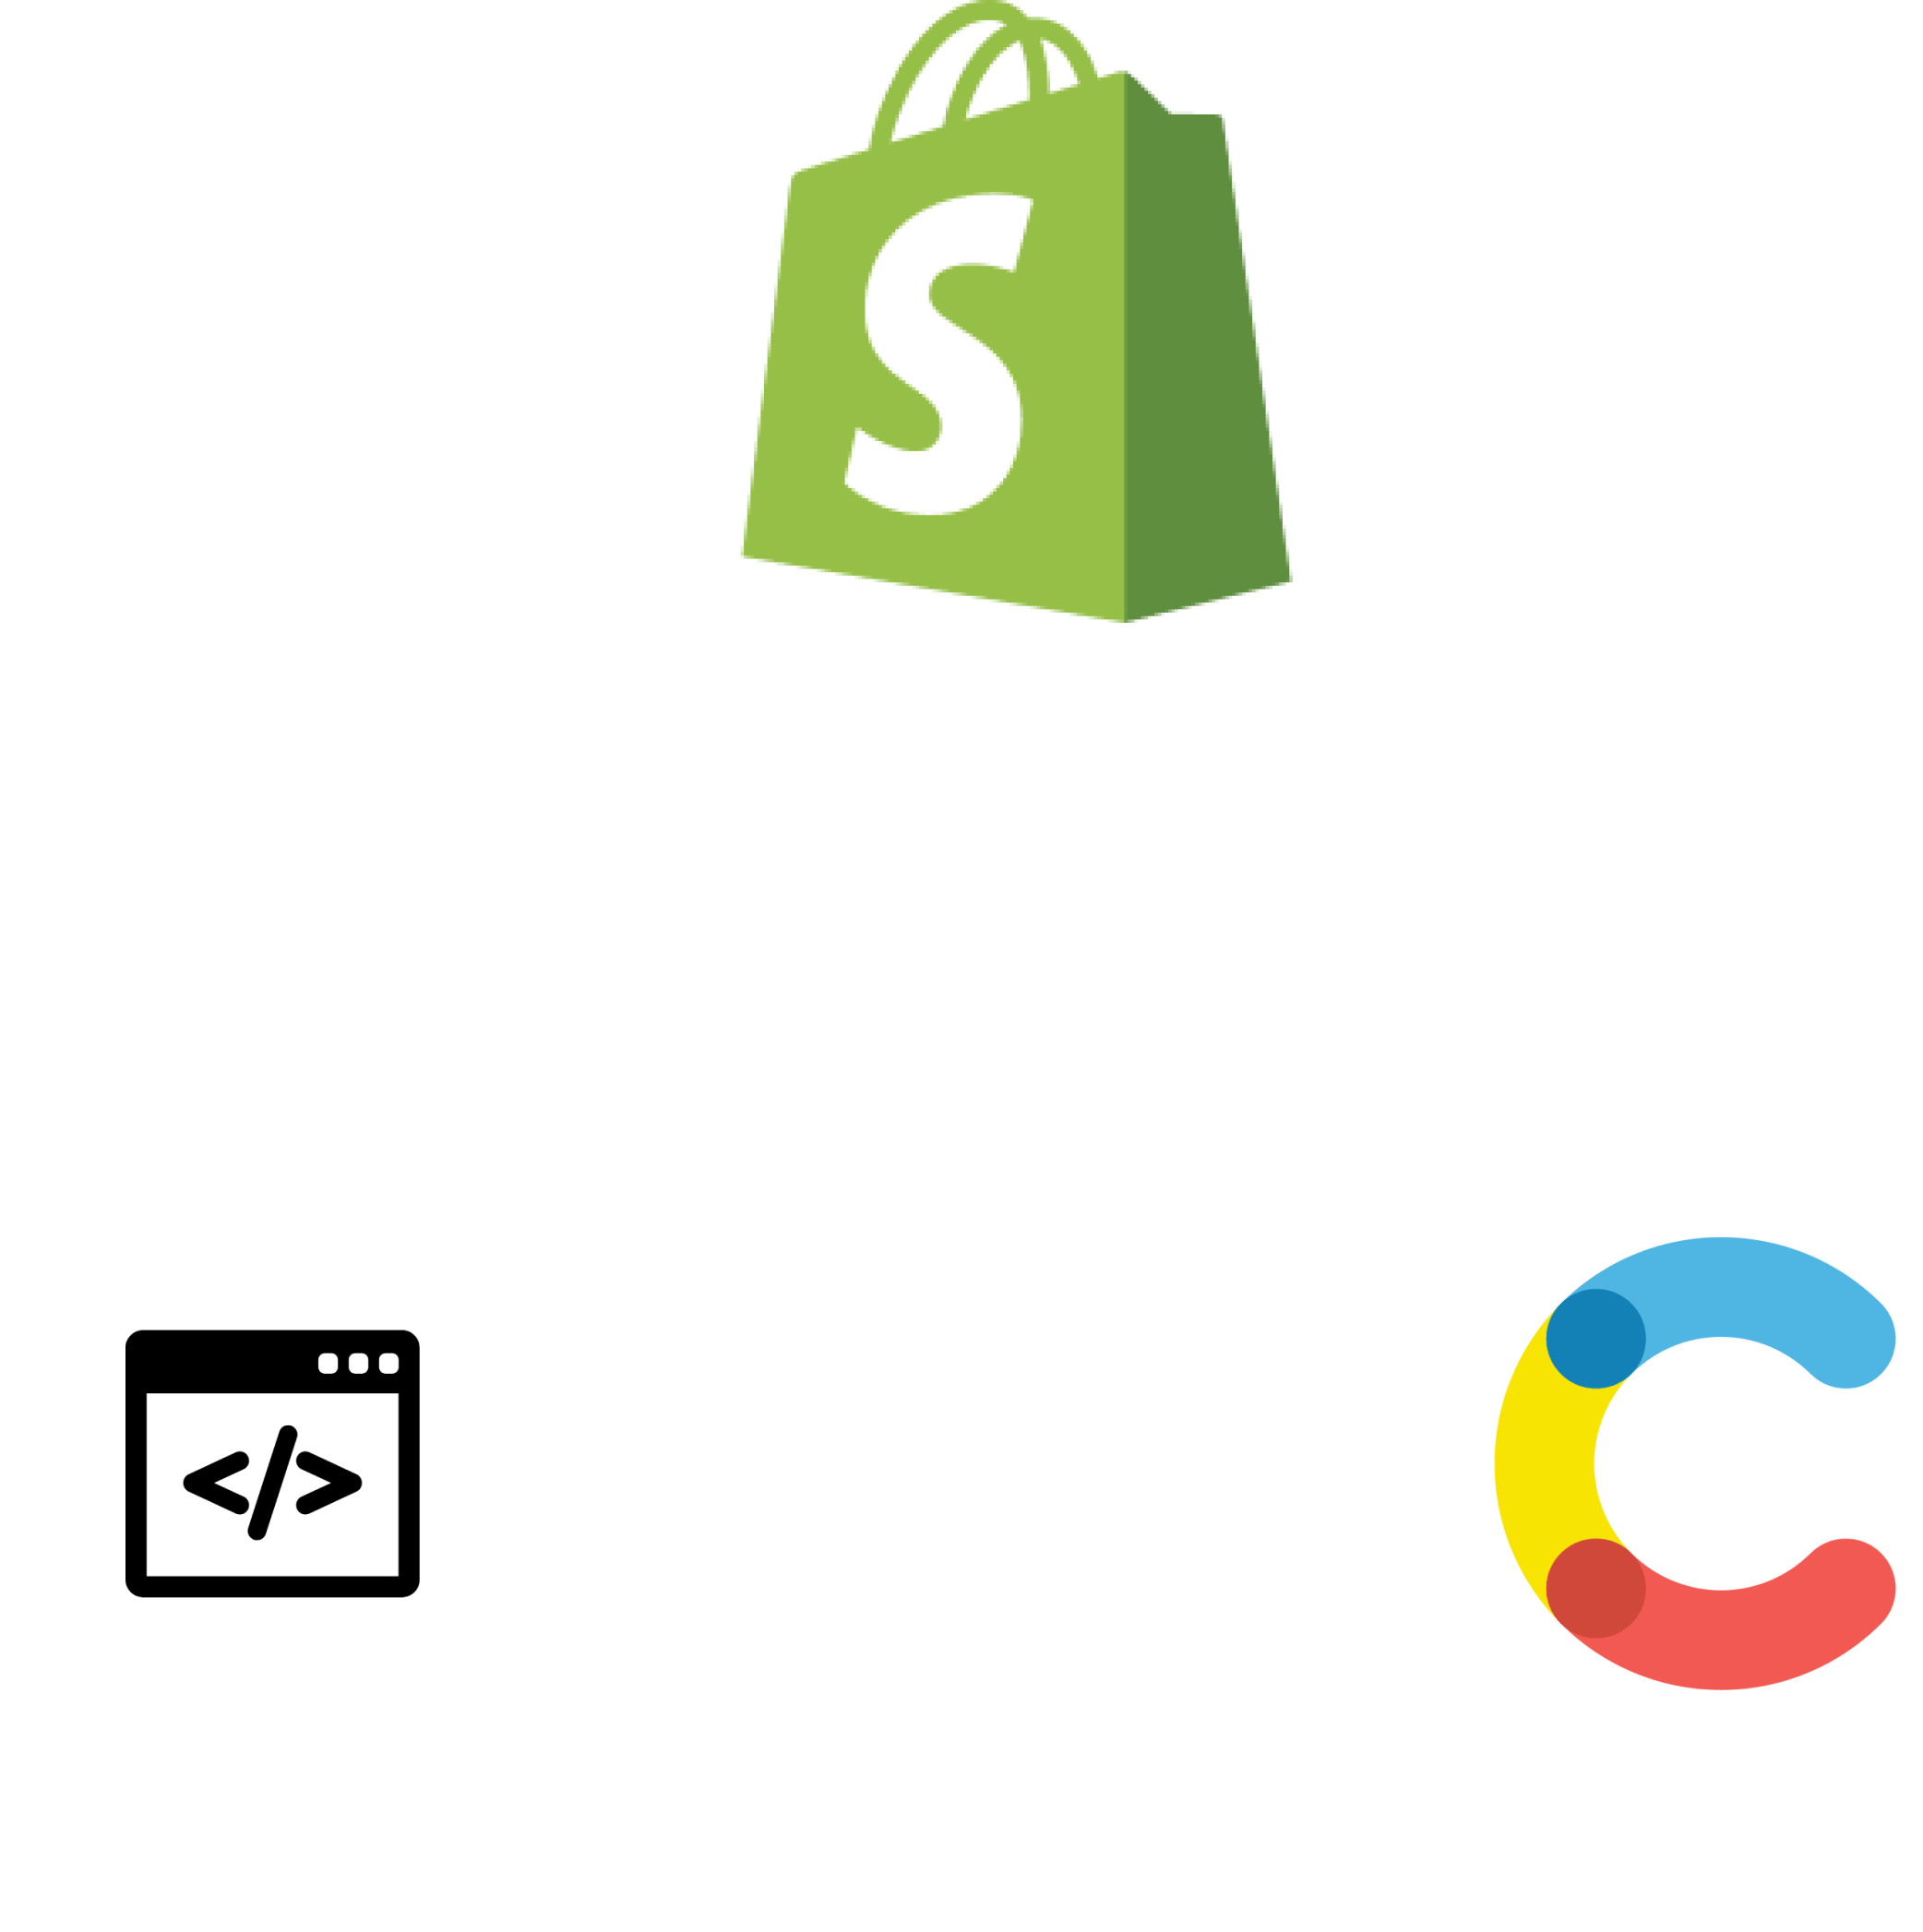 Code - Shopify - Contentful relationship triangle